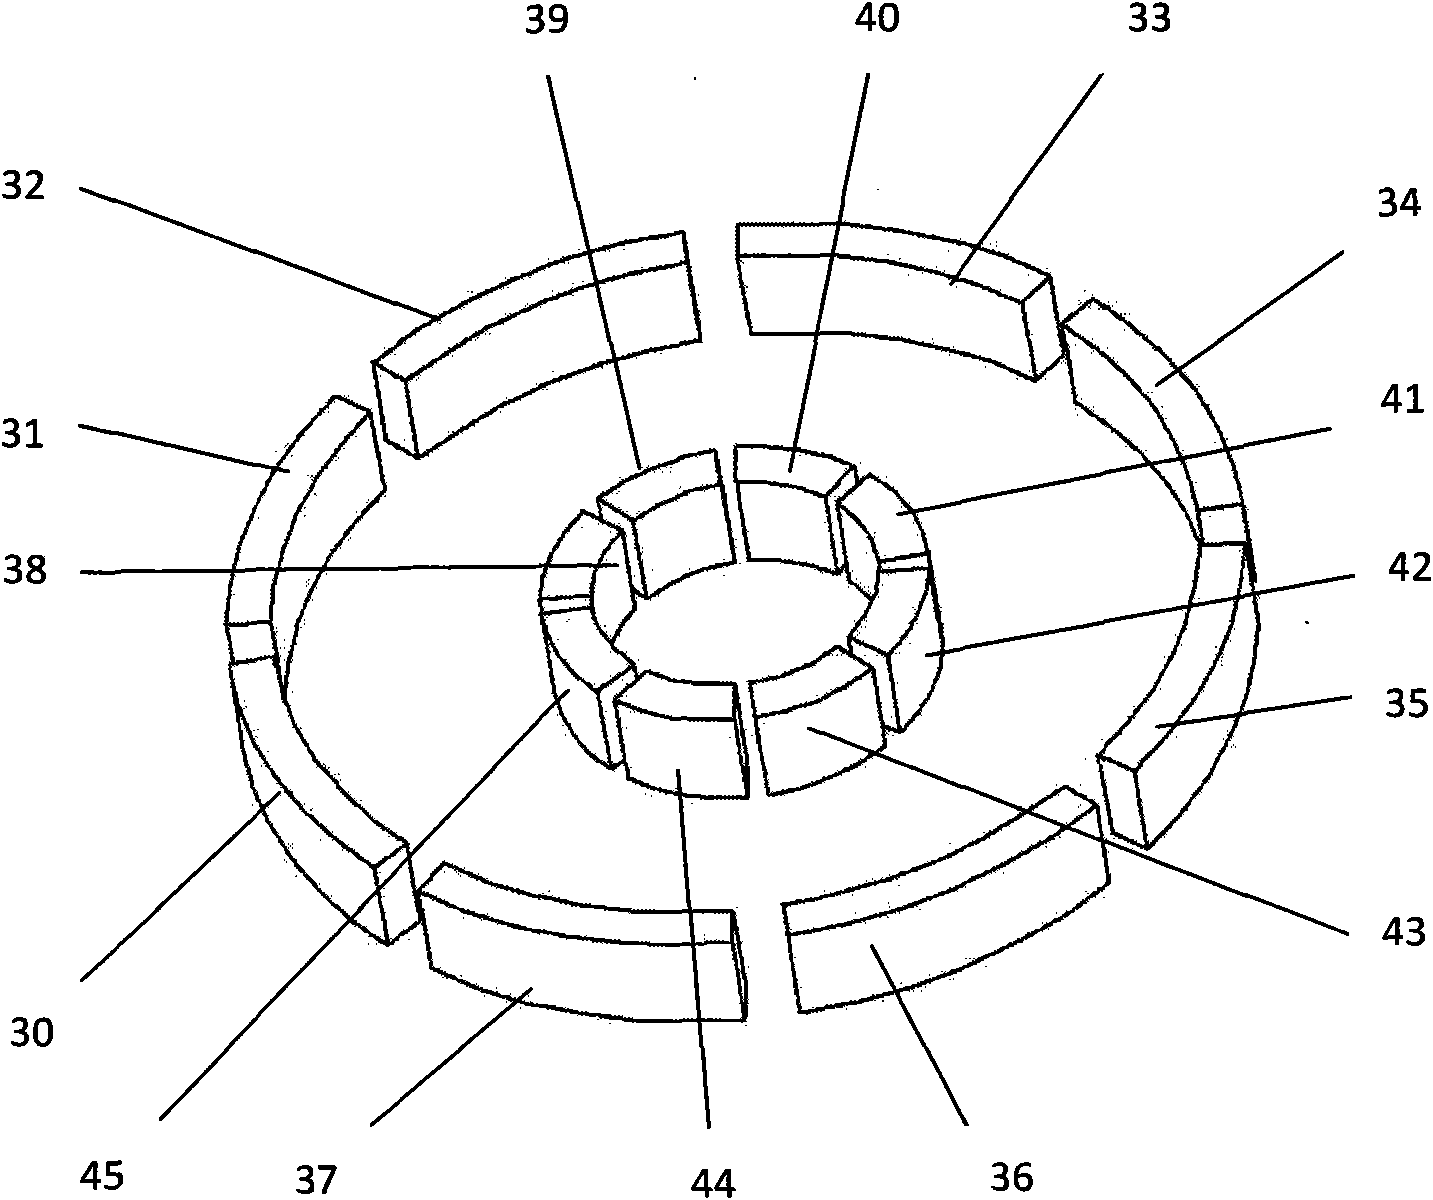 Suspension rotor micro gyro by utilizing electromagnetism and charge relaxation to work